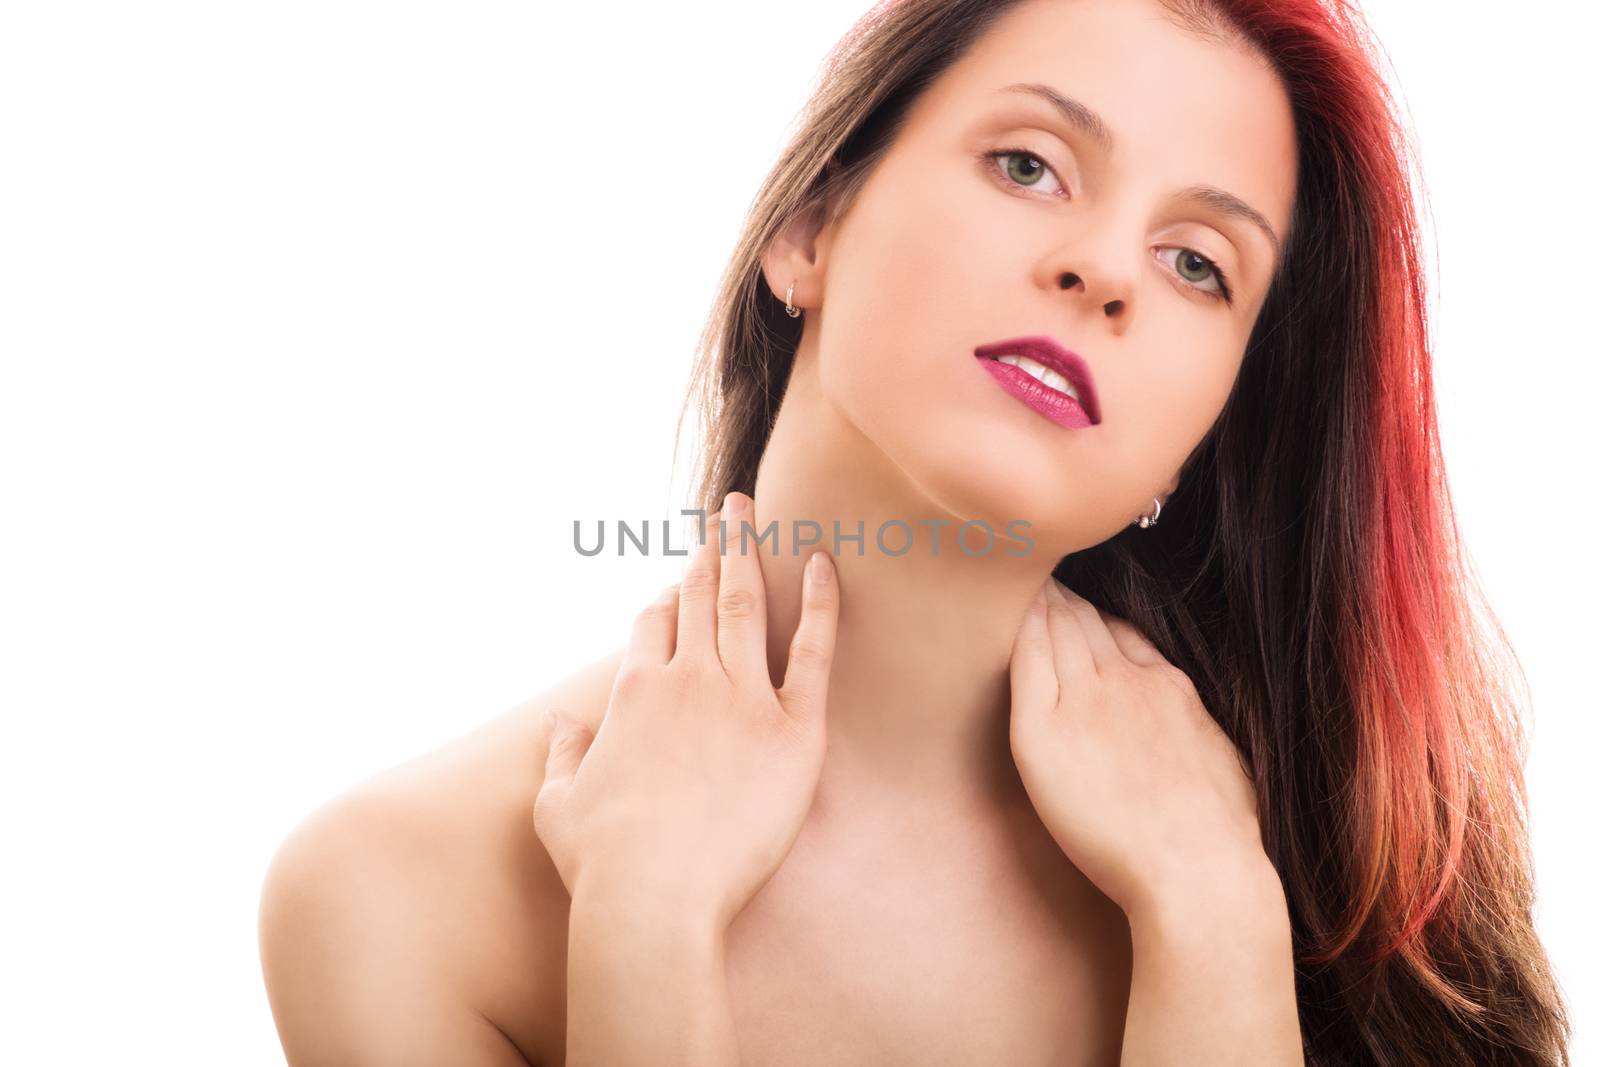 Sensual portrait of a beautiful young woman with natural clean make up, isolated on white background.

